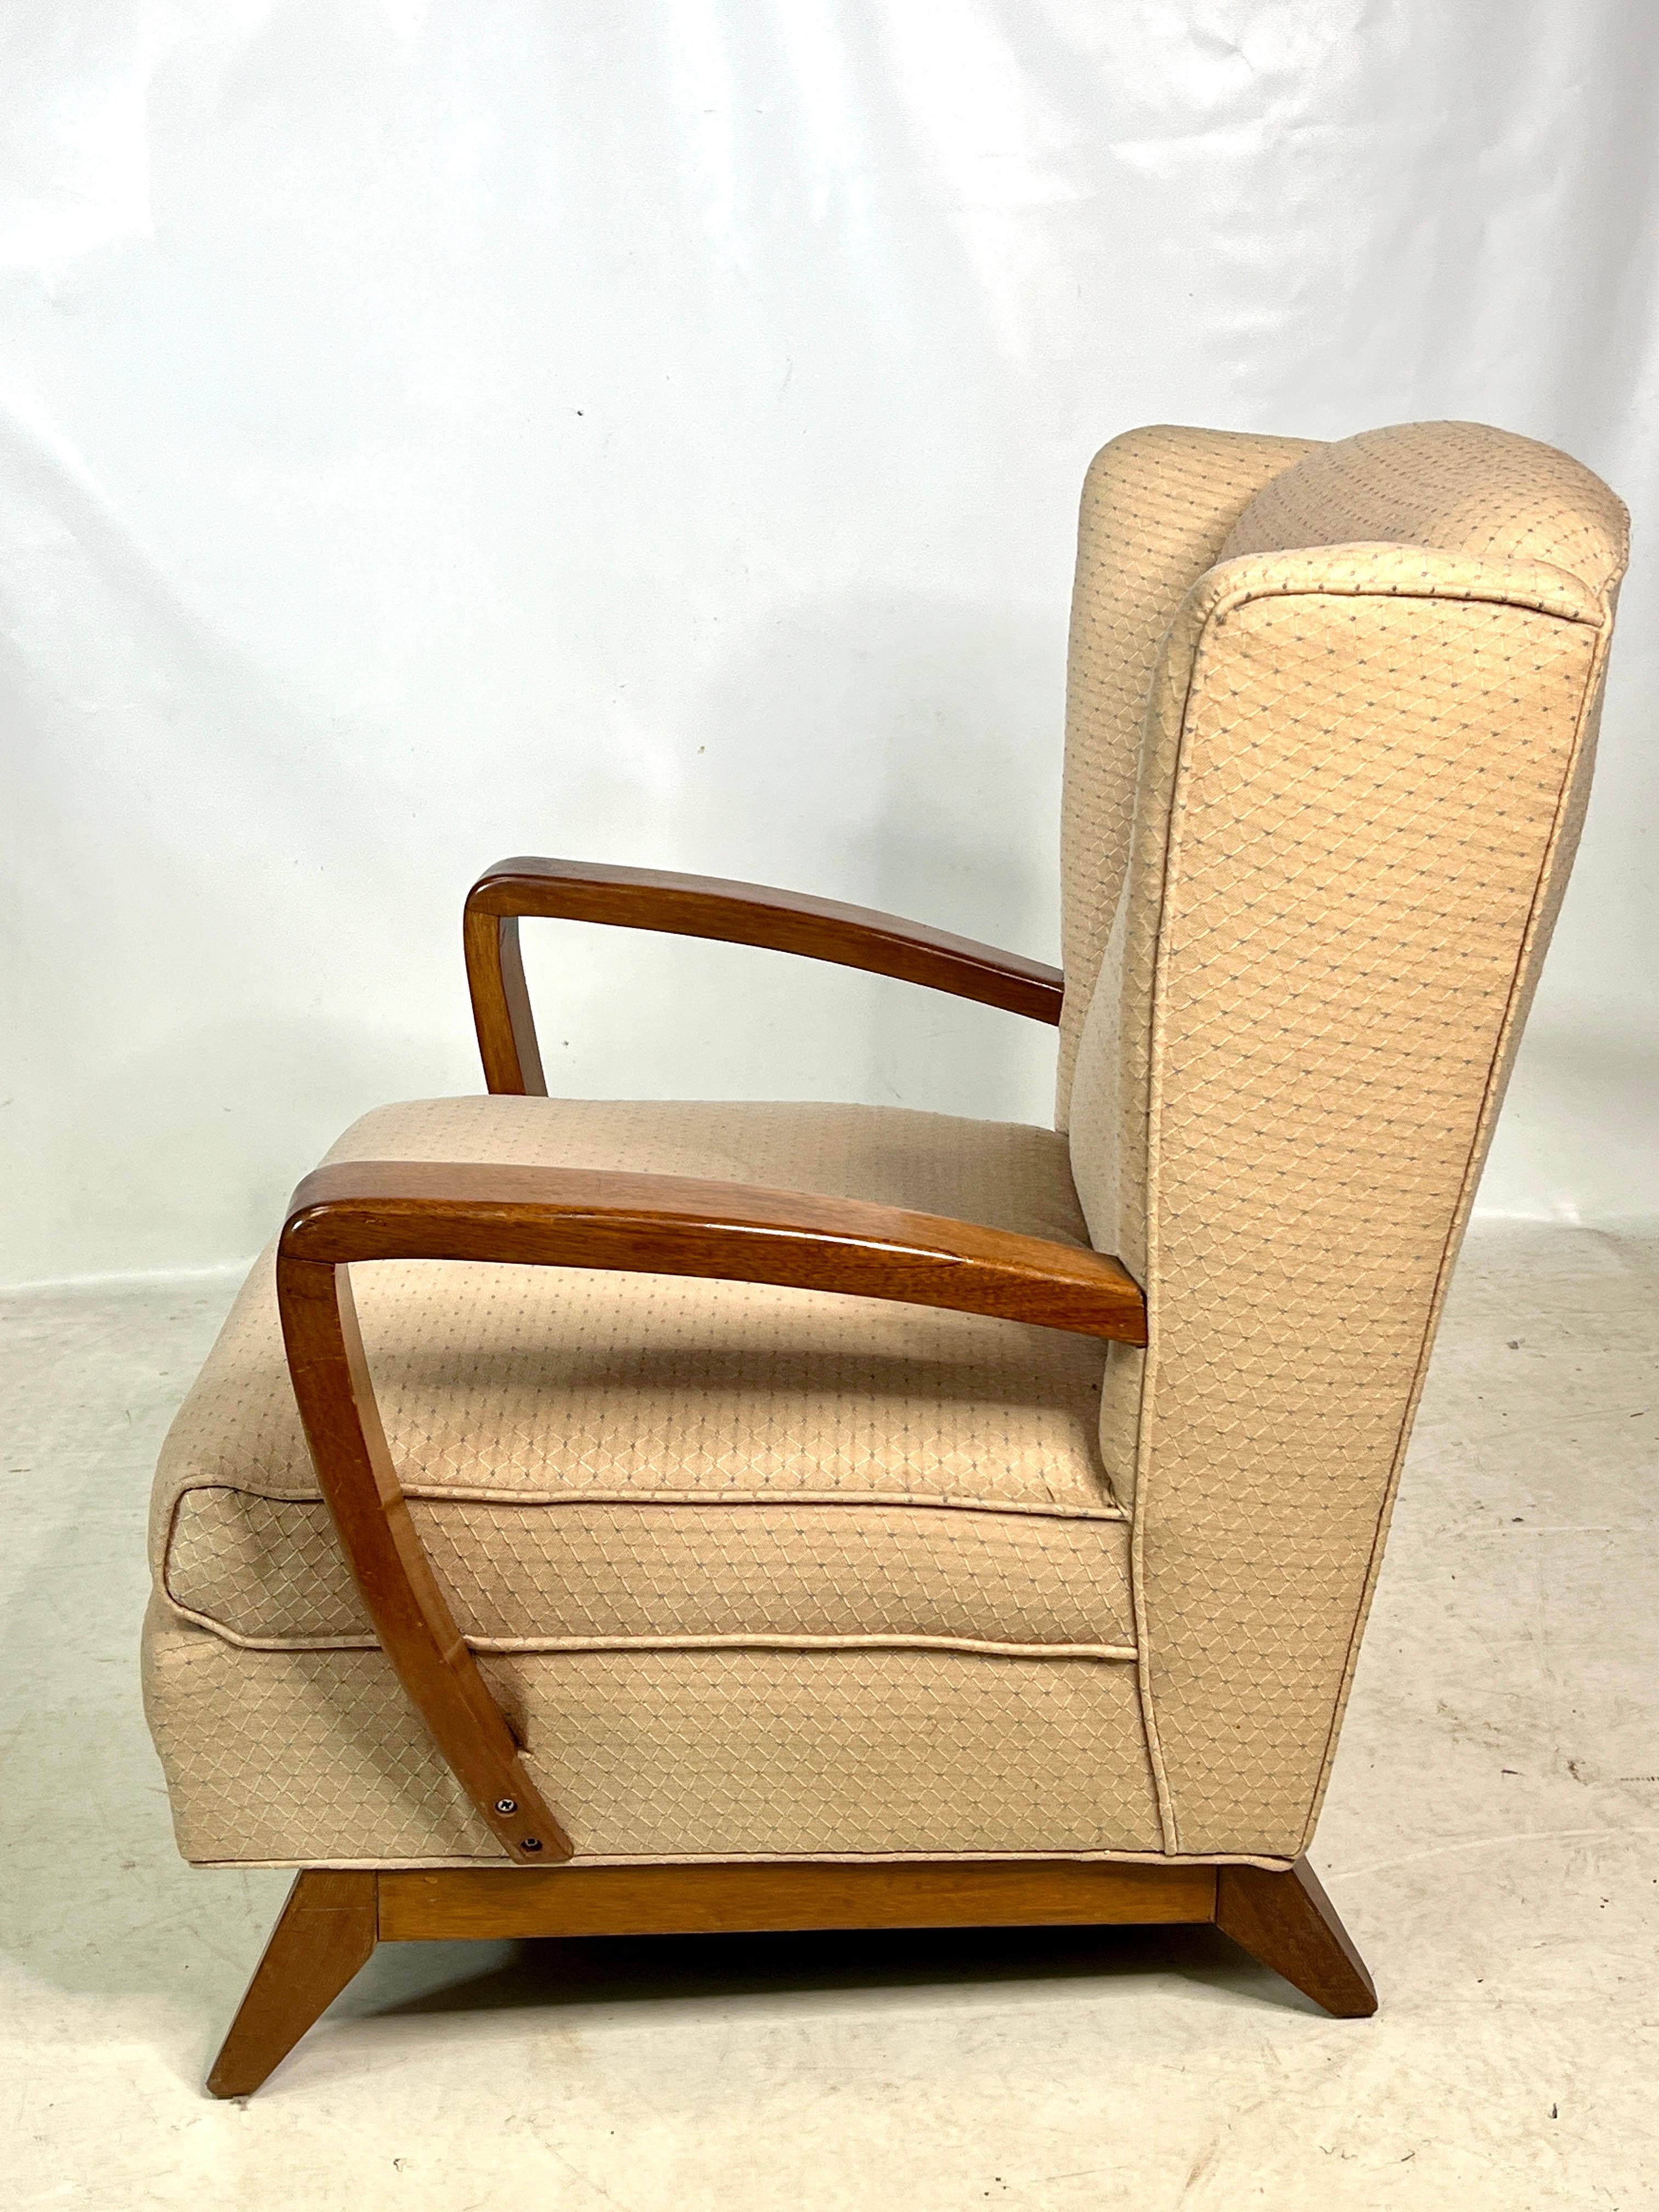 For sale is this very nice vintage wingback arm chair. The chair has a great design and is very comfortable